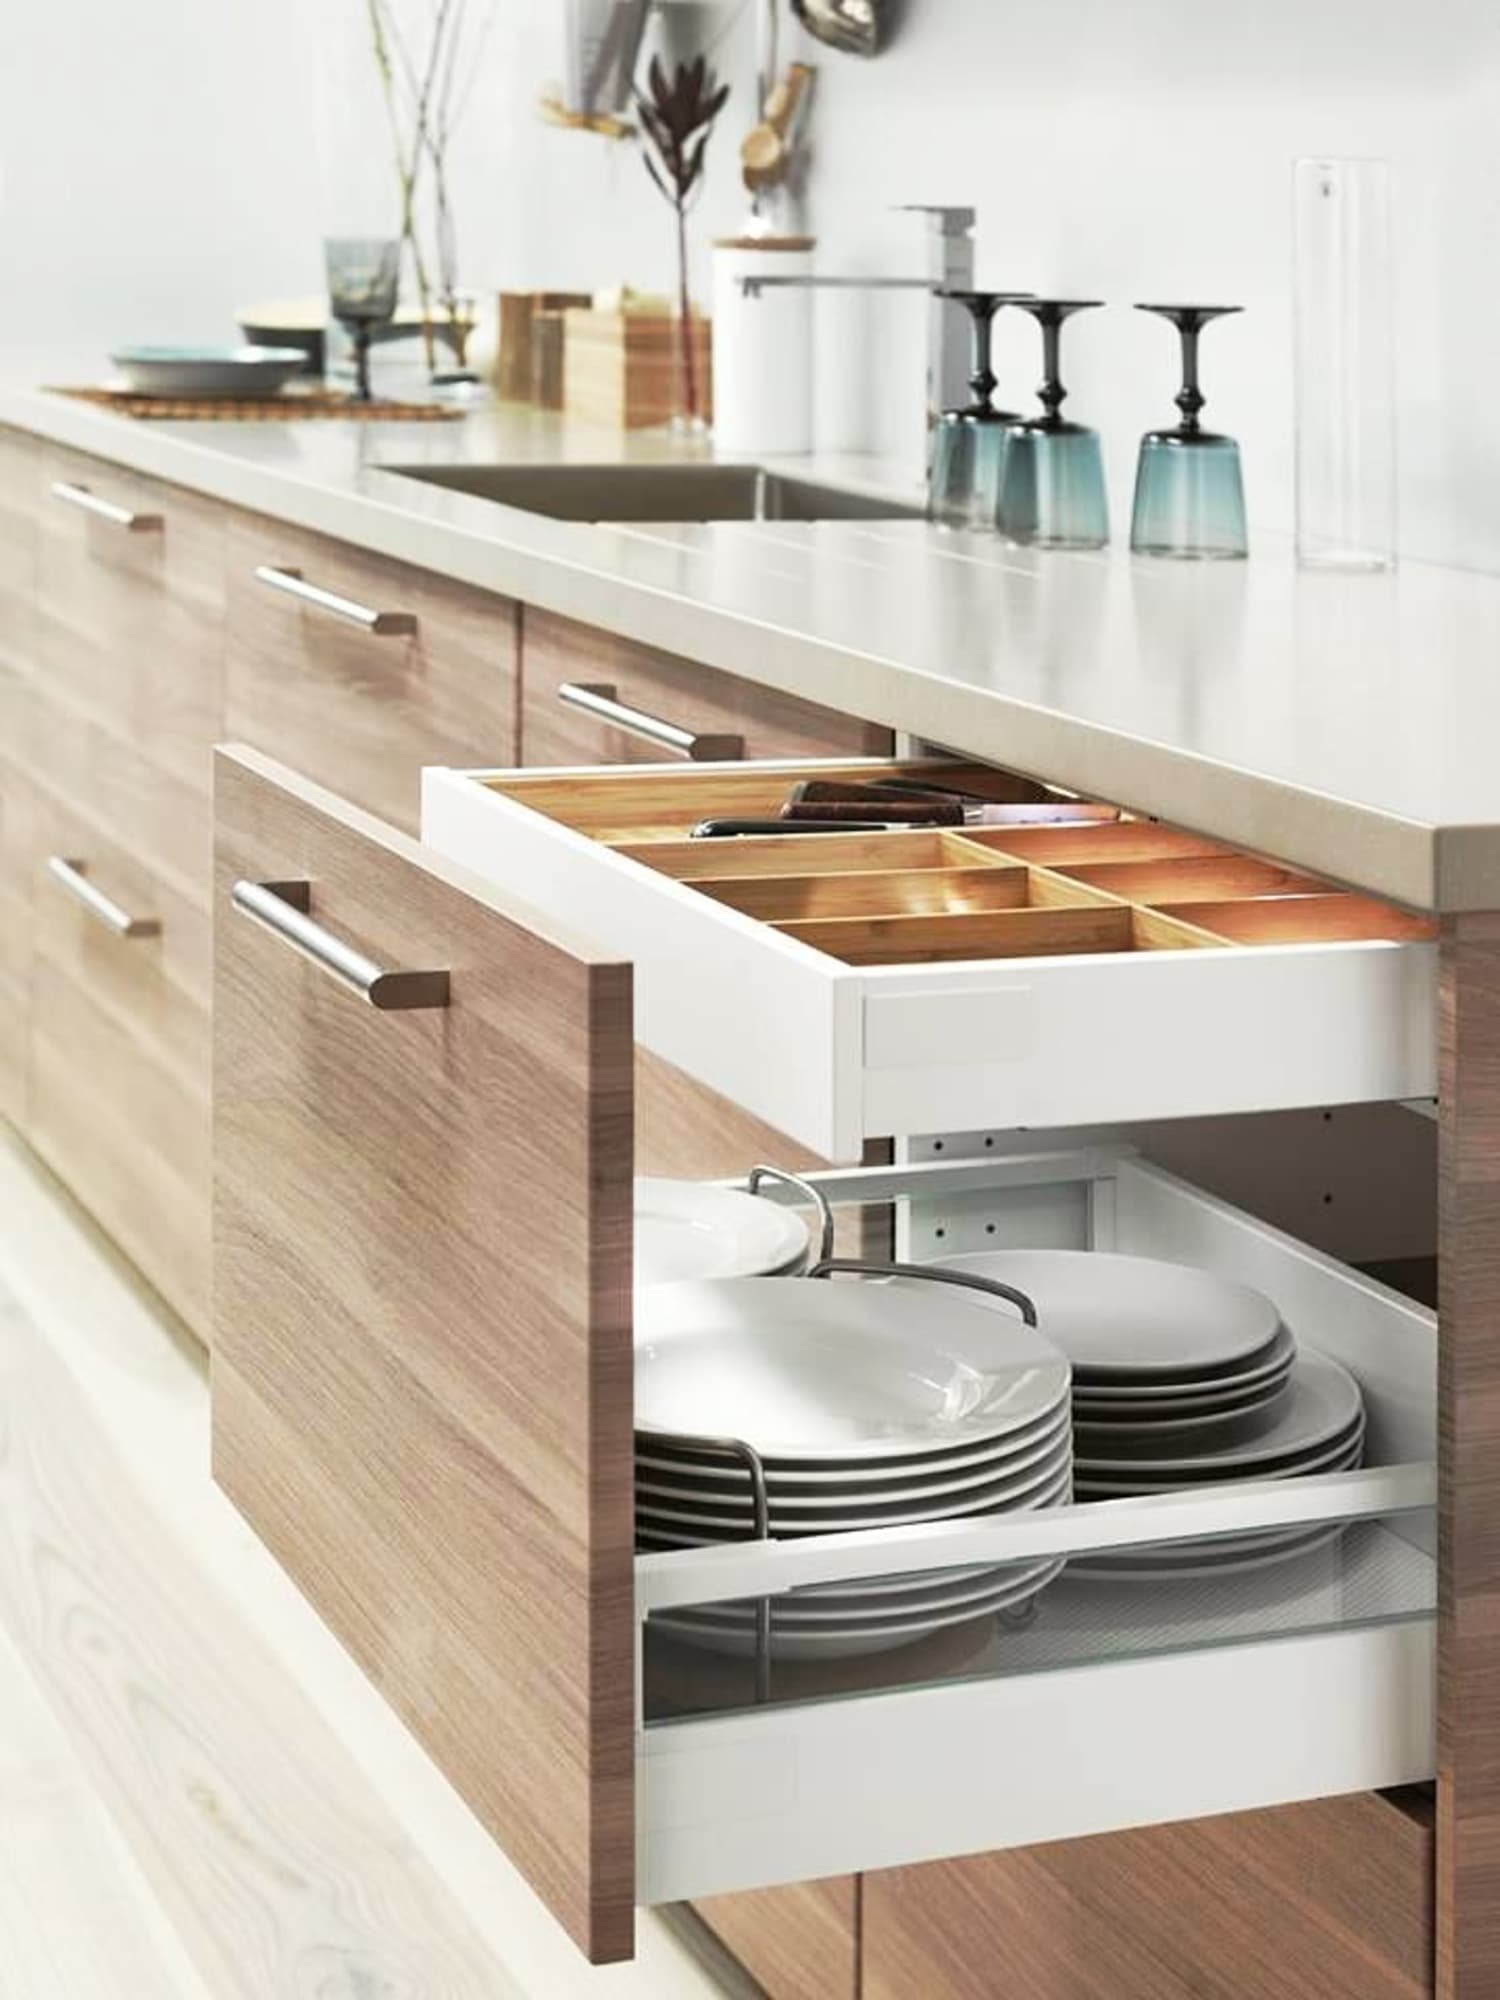 ikea is entirely transforming their kitchen area closet system